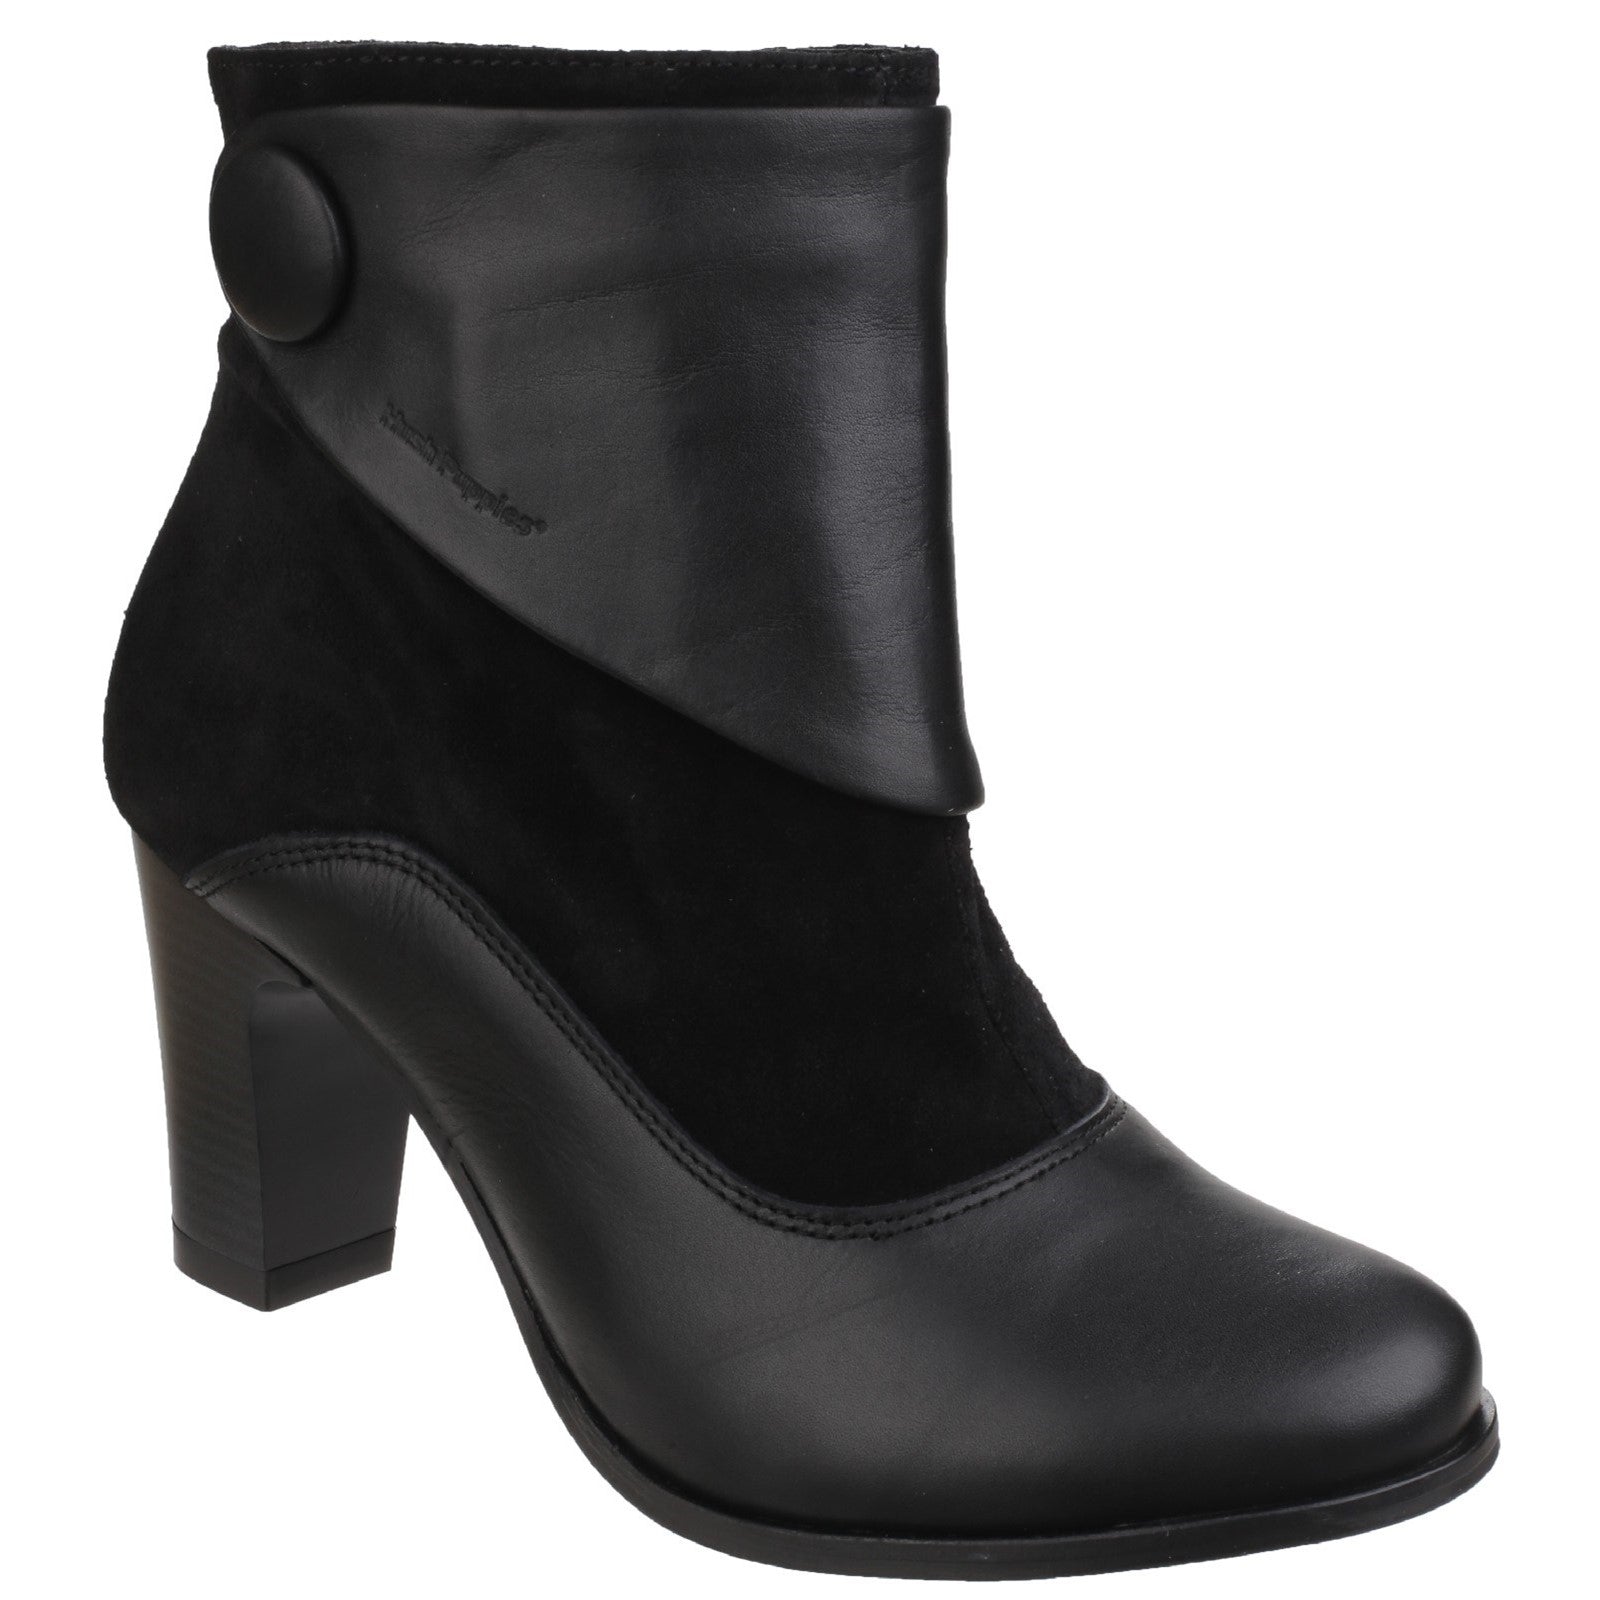 Hush Puppies Willow Slip on Ankle Boot